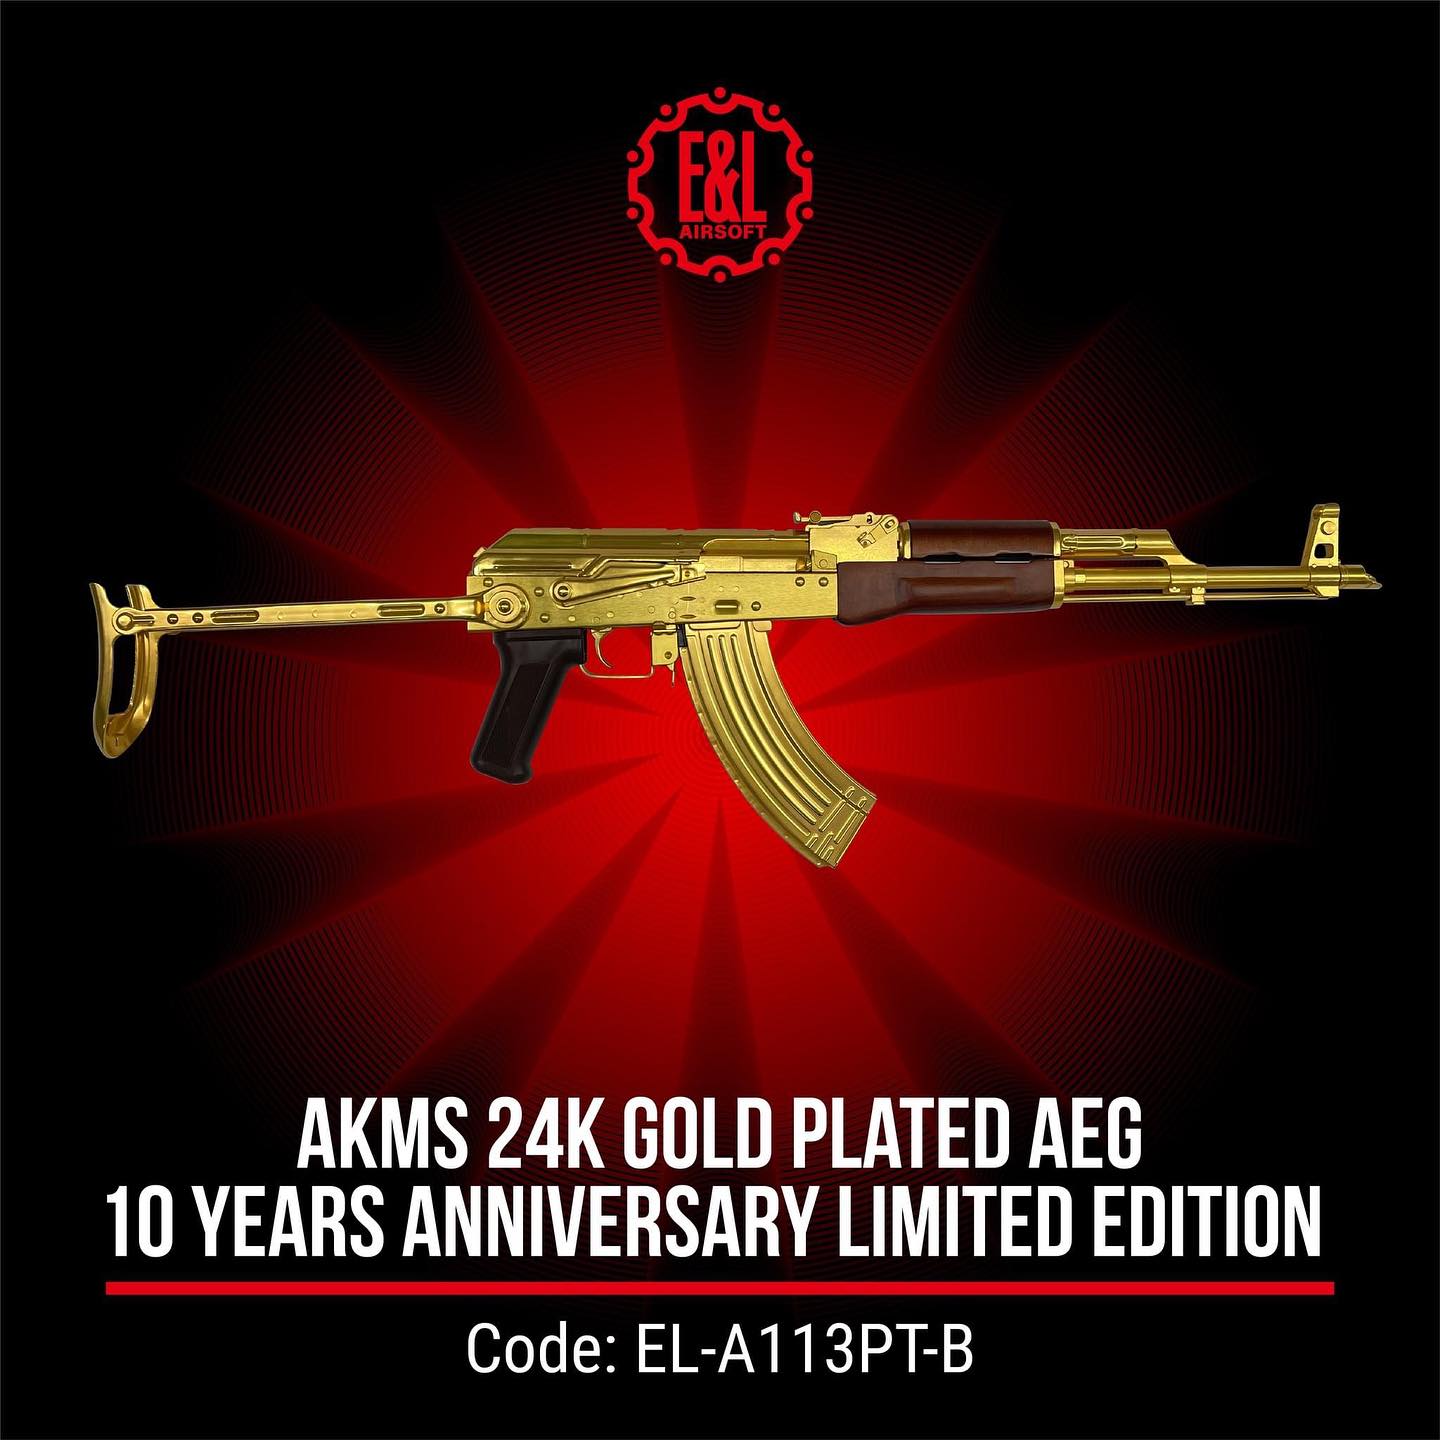 E&L AKMS 24K Gold Plated AEG 10 years Anniversary Limited Edition